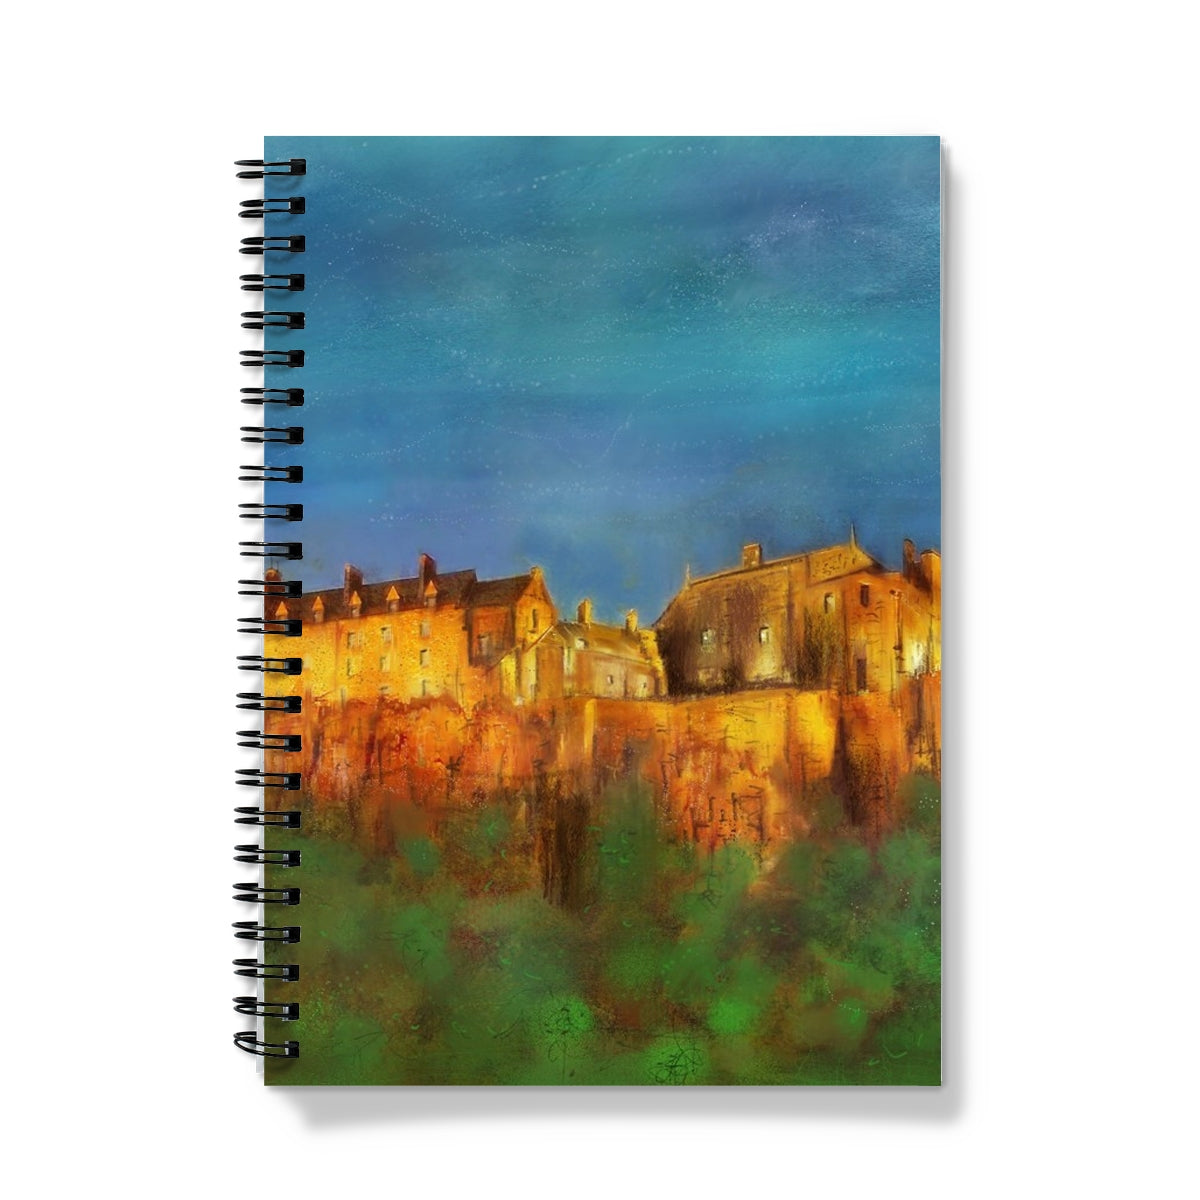 Stirling Castle Art Gifts Notebook-Journals & Notebooks-Historic & Iconic Scotland Art Gallery-A5-Graph-Paintings, Prints, Homeware, Art Gifts From Scotland By Scottish Artist Kevin Hunter